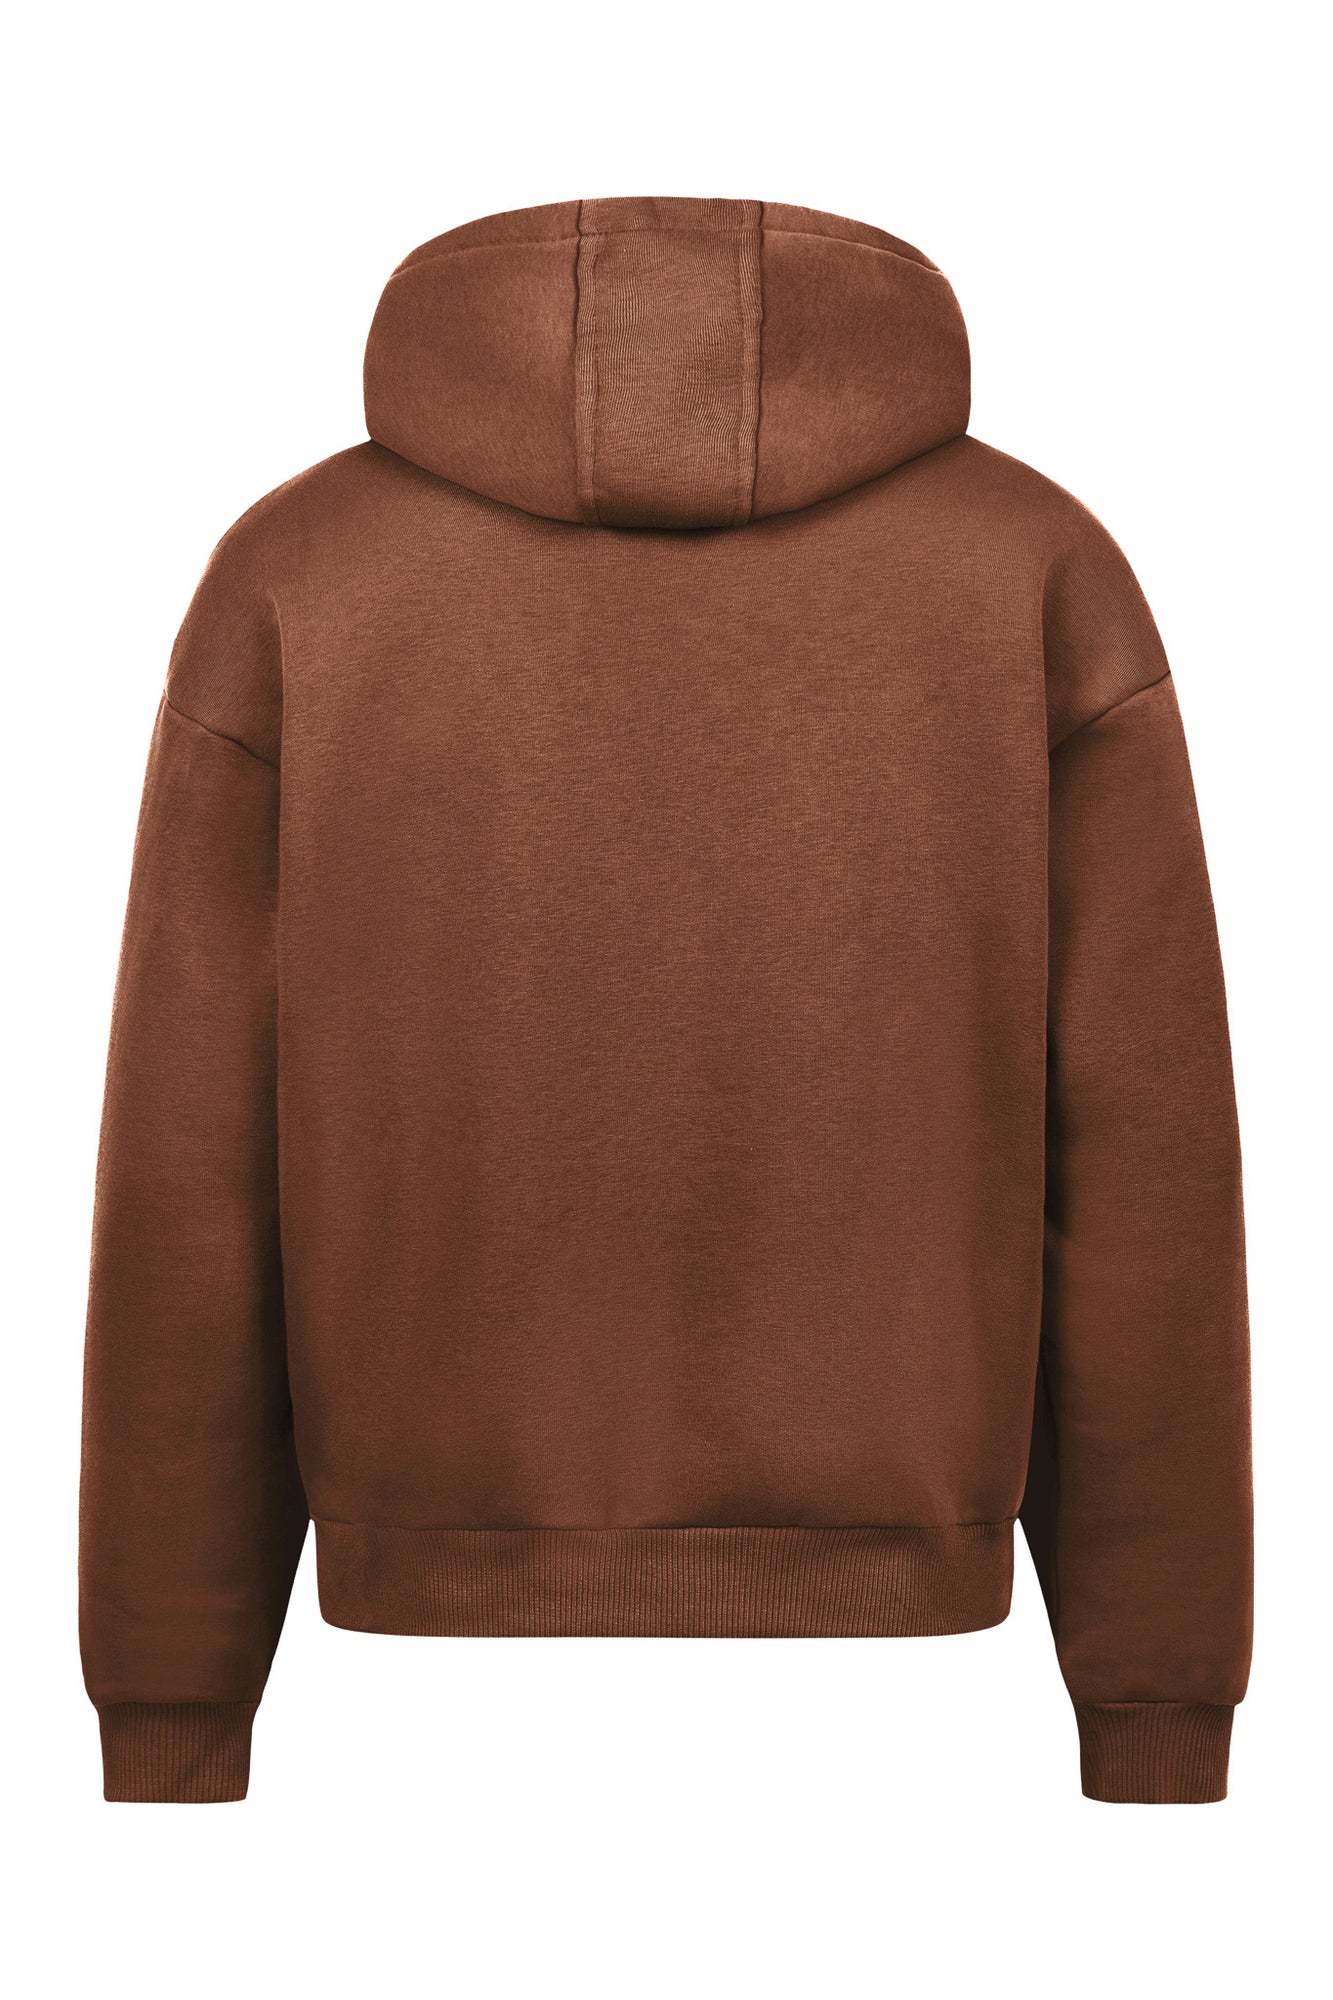 CHICAGO HOODIE (COFFEE BROWN)